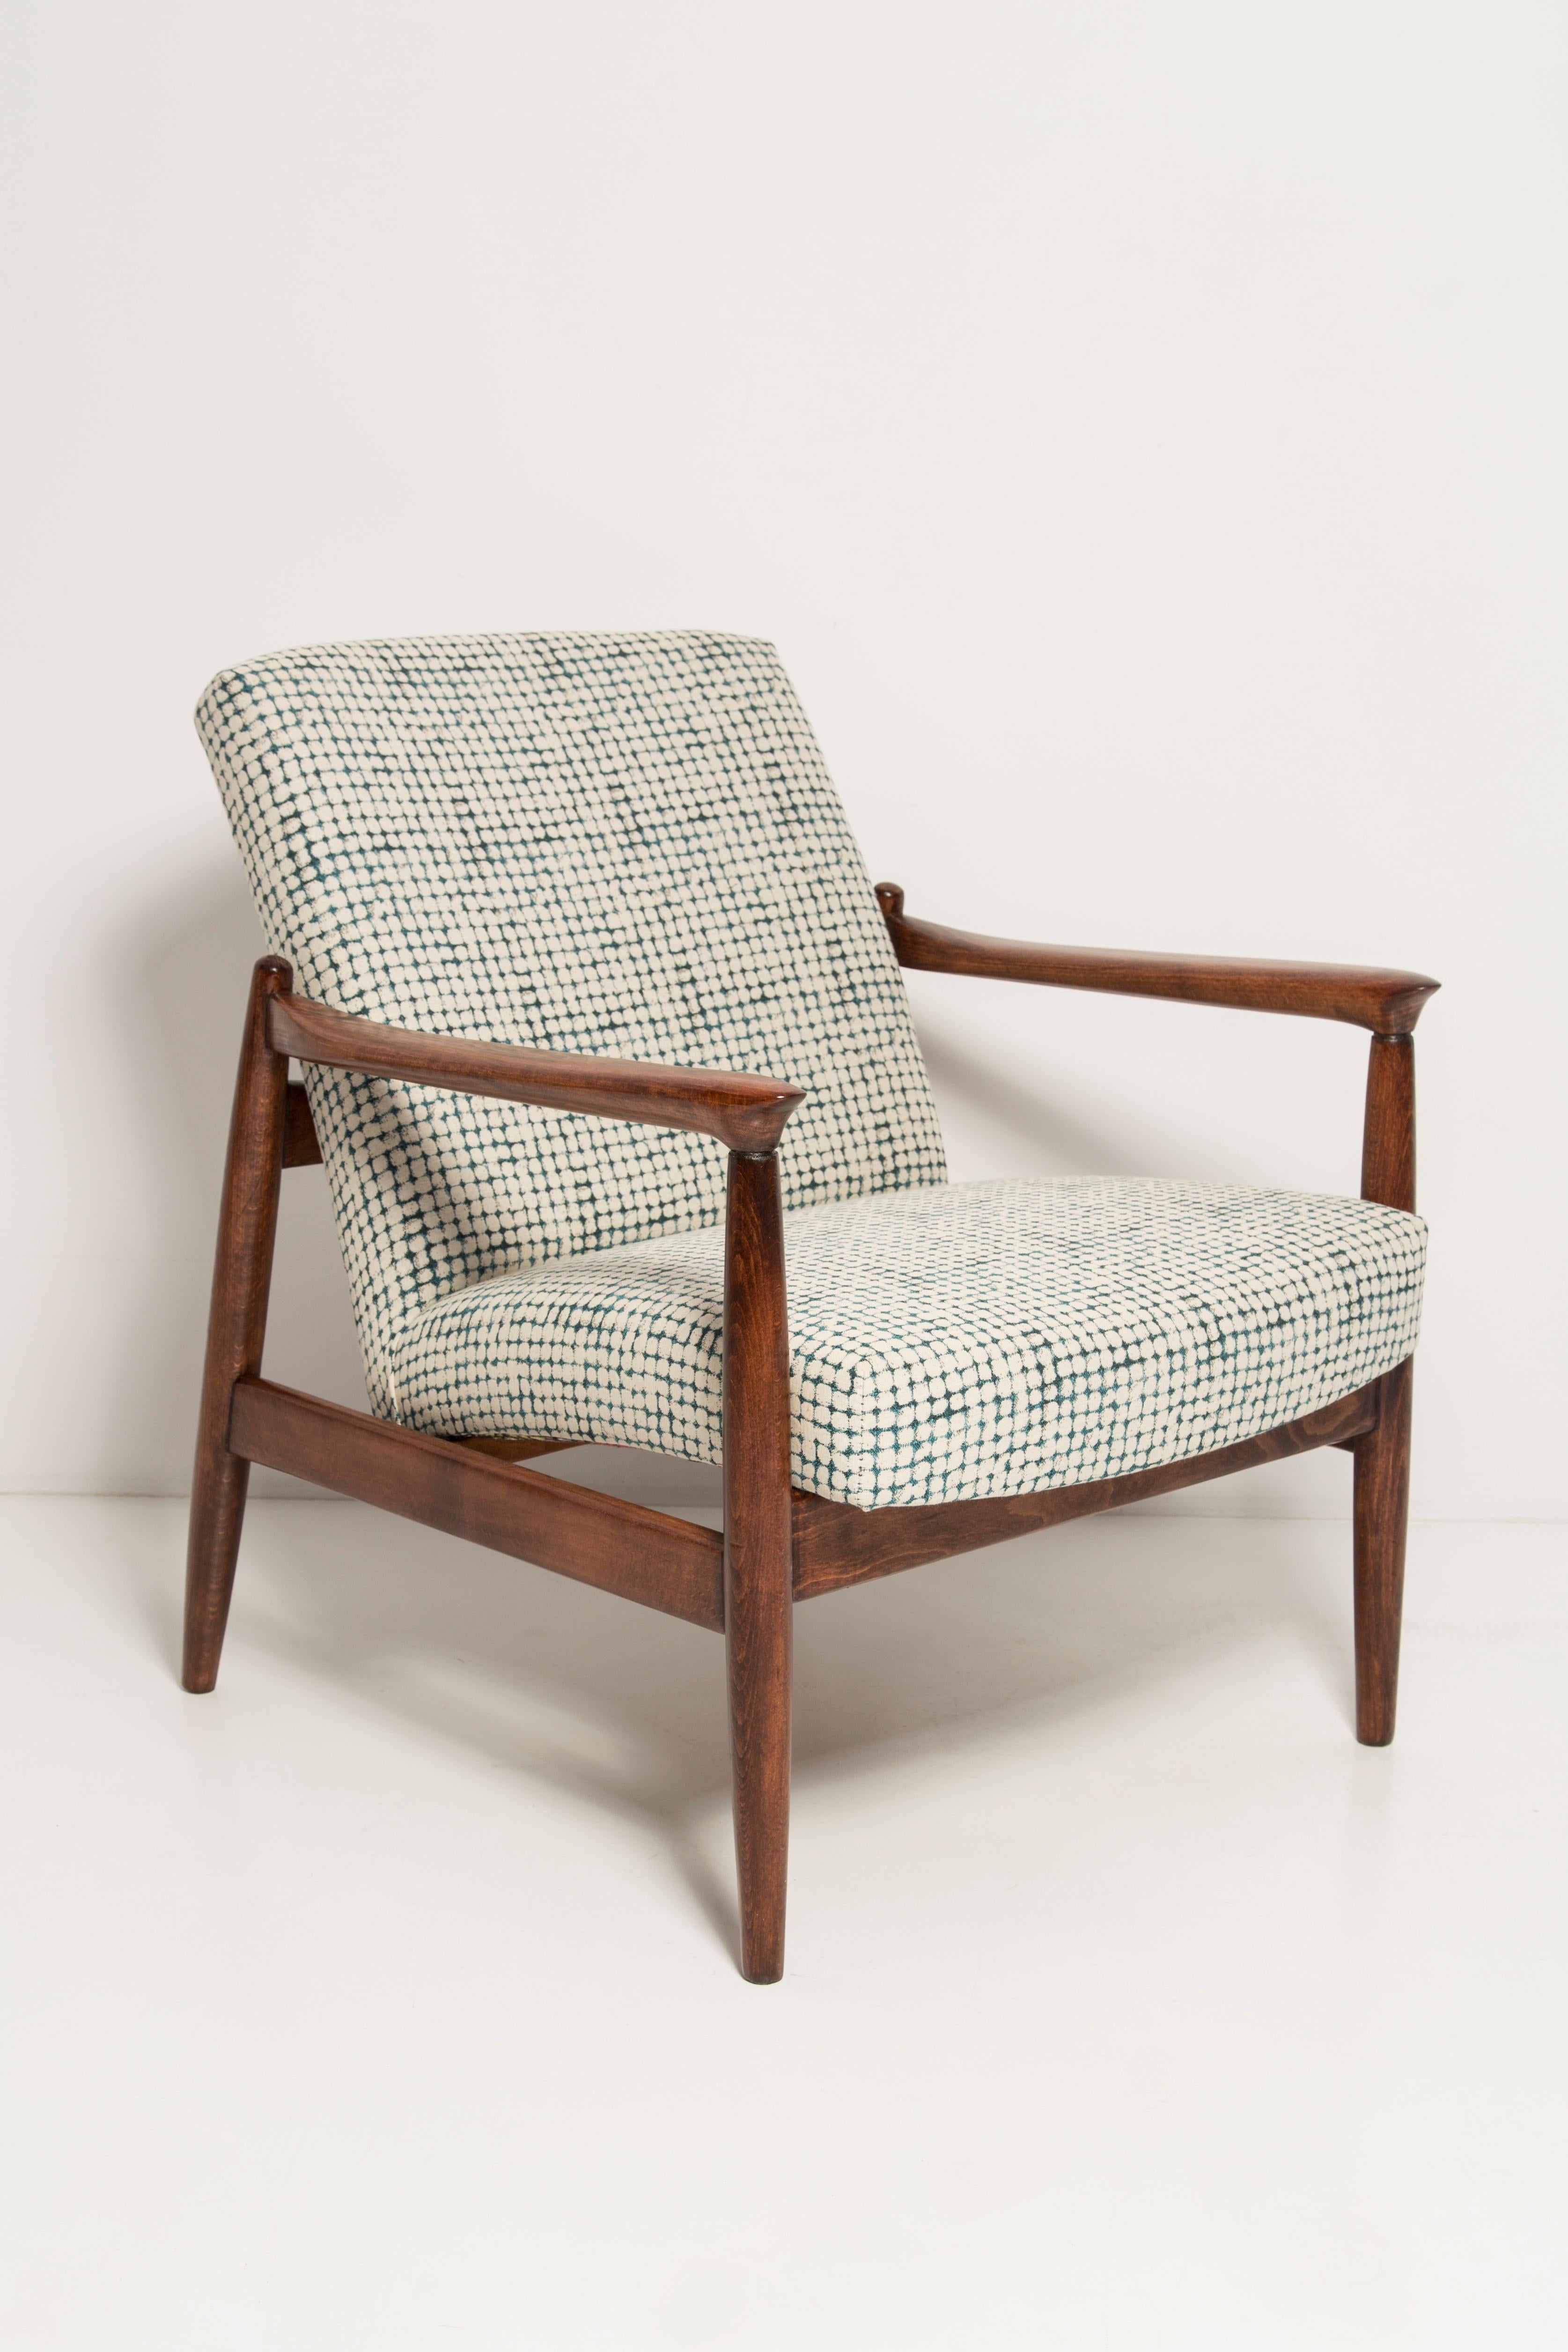 Beautiful armchair and foot stool, designed by Edmund Homa. The armchair was made in the 1960s in the Gosciecinska Furniture Factory from solid beechwood. The GFM type armchair is regarded one of the best polish armchair design from the previous